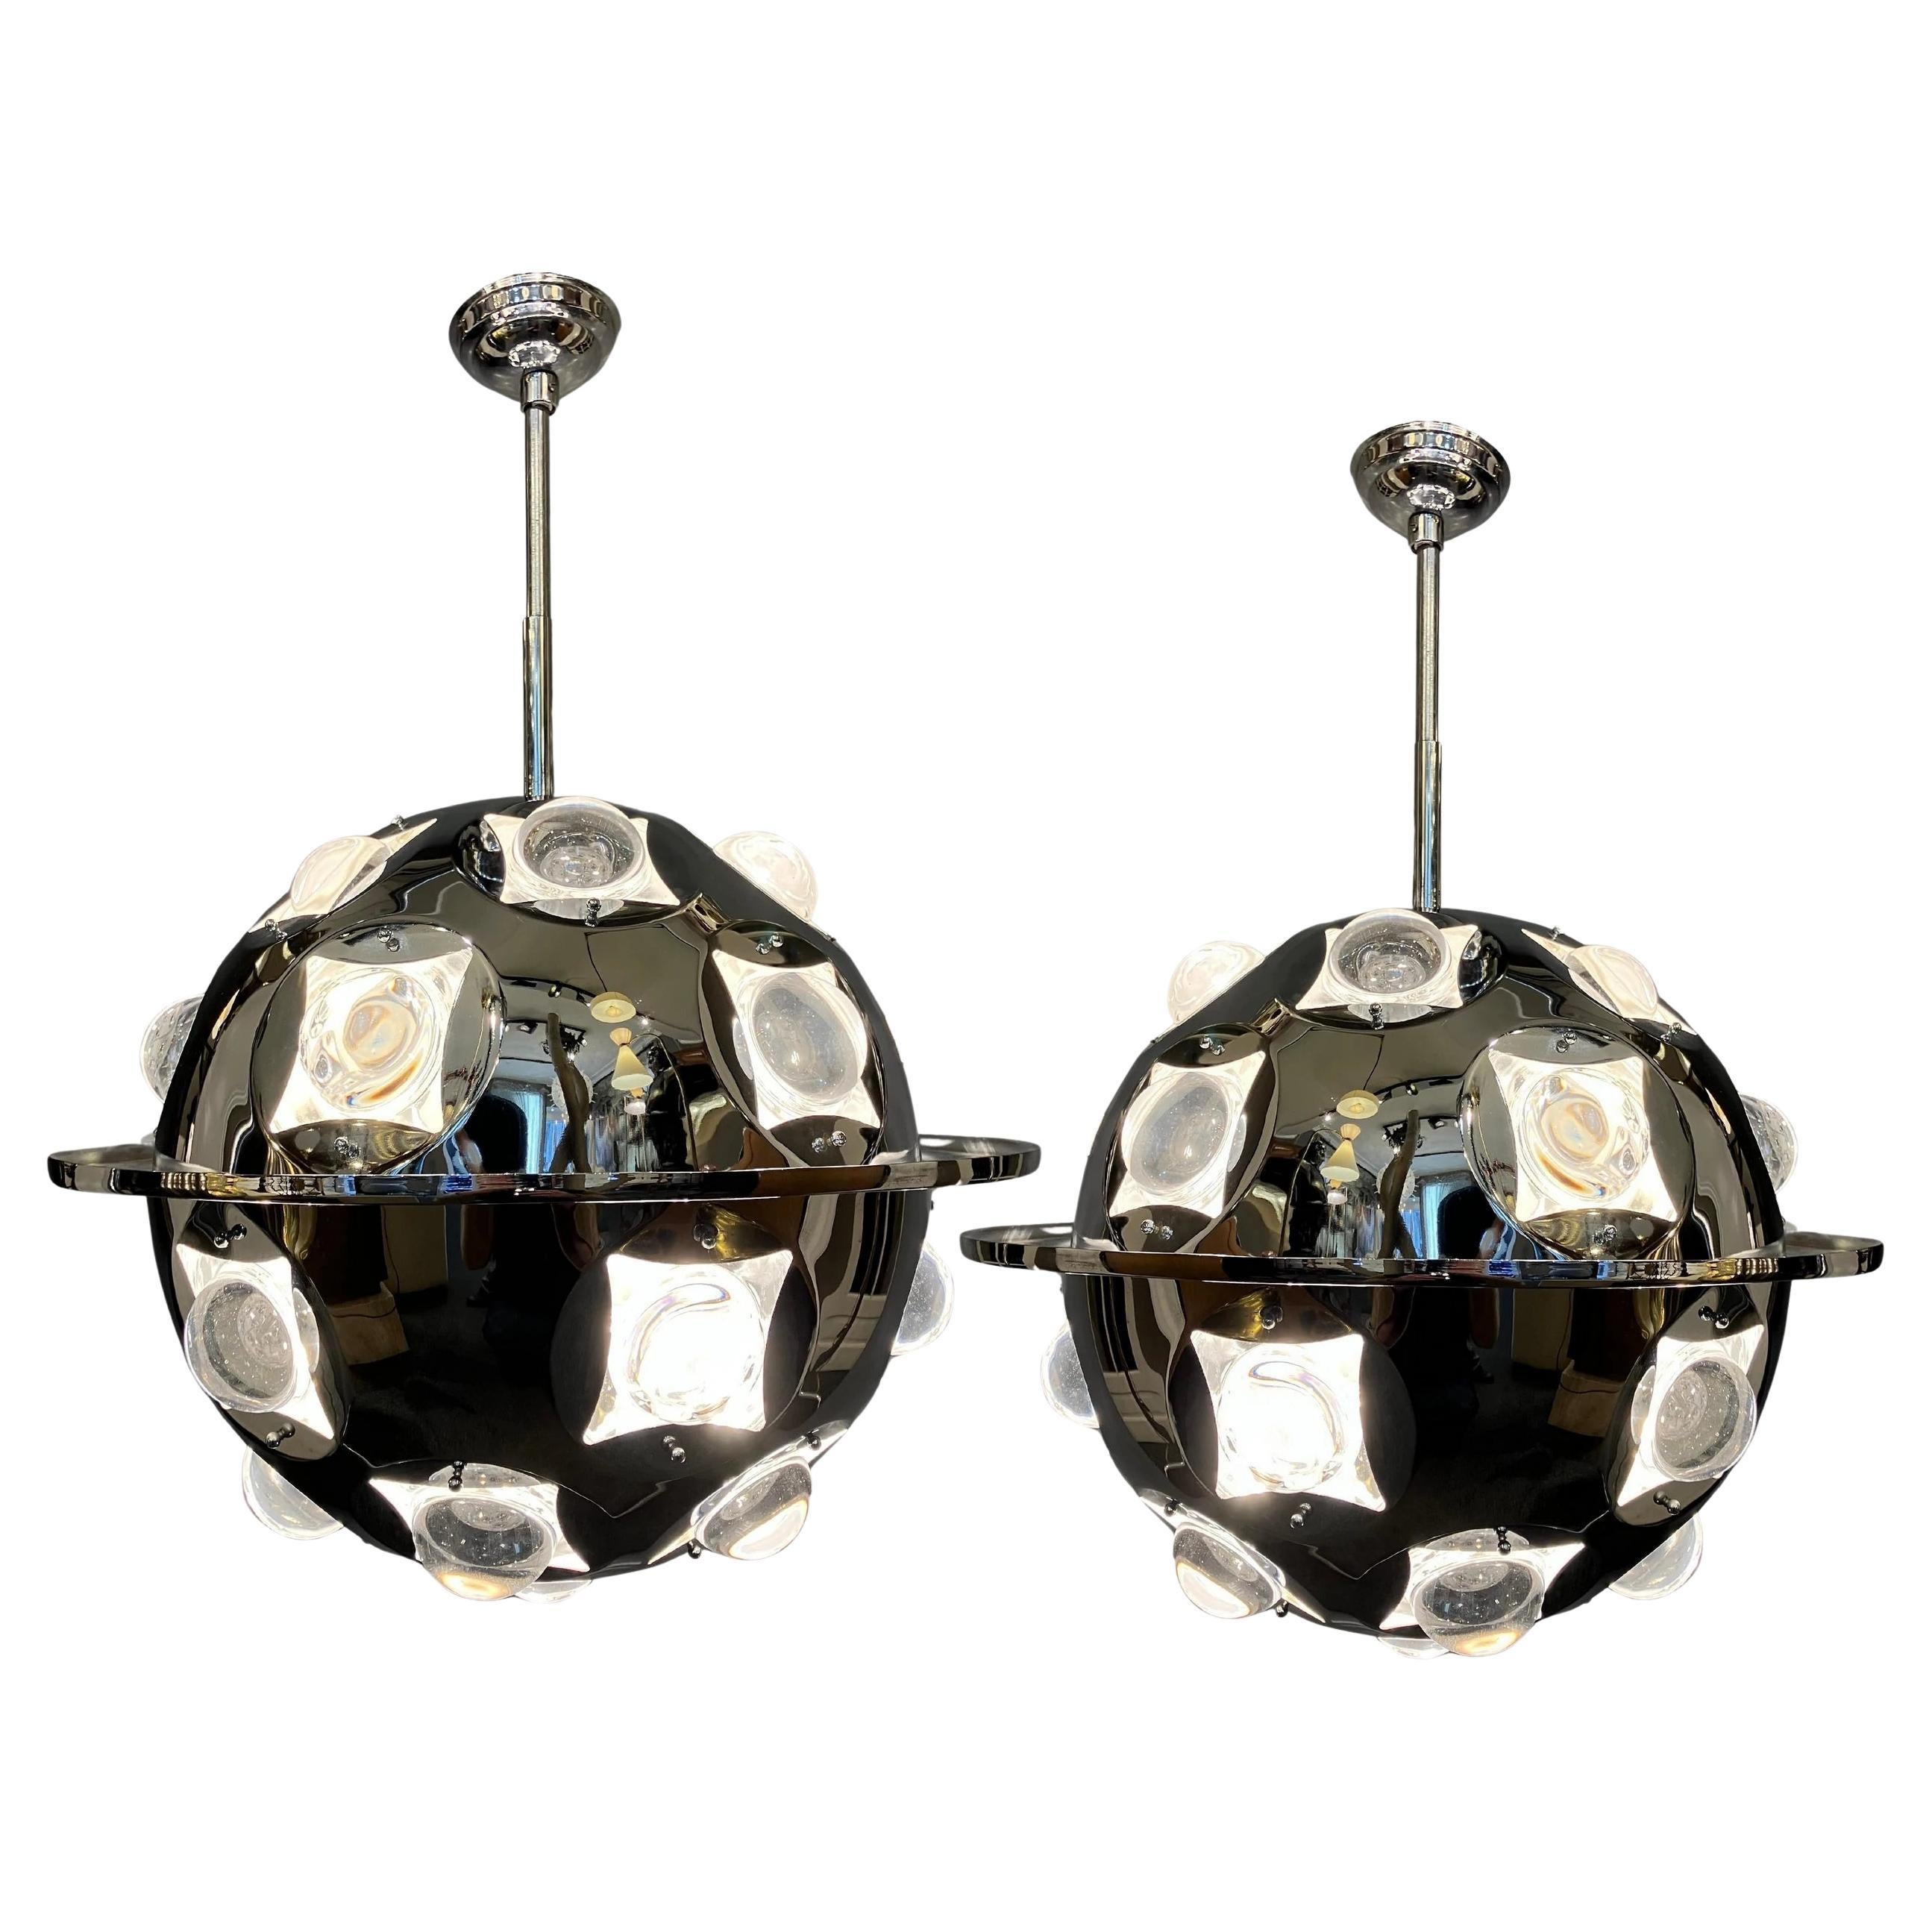 Pair of Sputnik chandeliers, attributed to Oscar Torlasco, Editions Lumi, Italy 